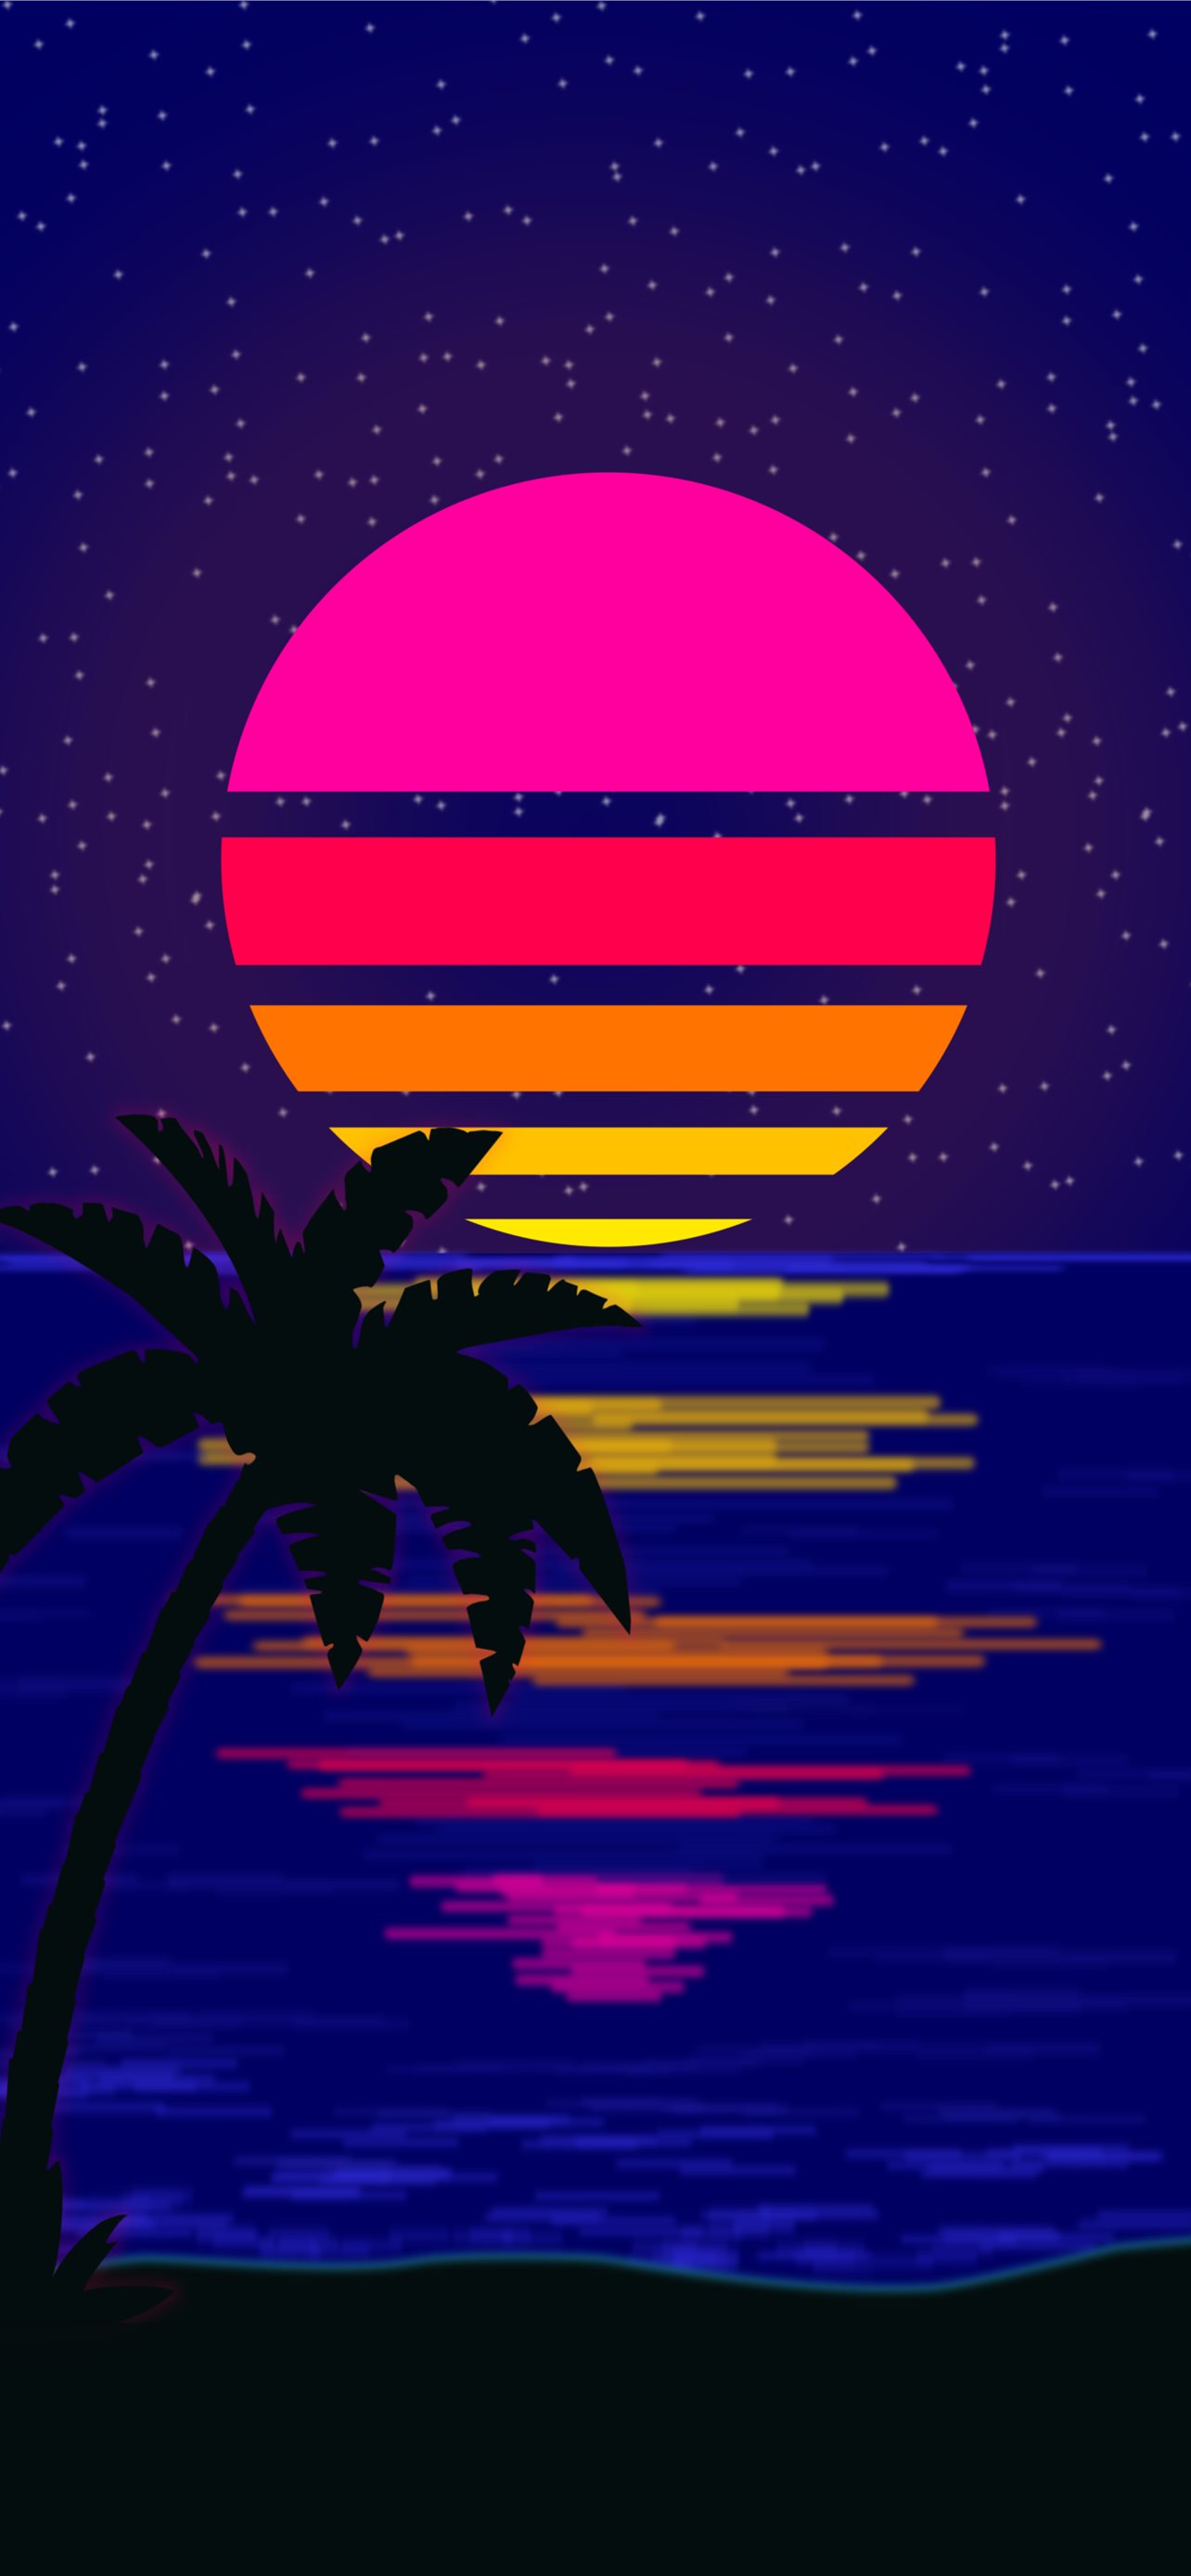 4K WALLPAPER FOR PHONE  SYNTHWAVE CAR